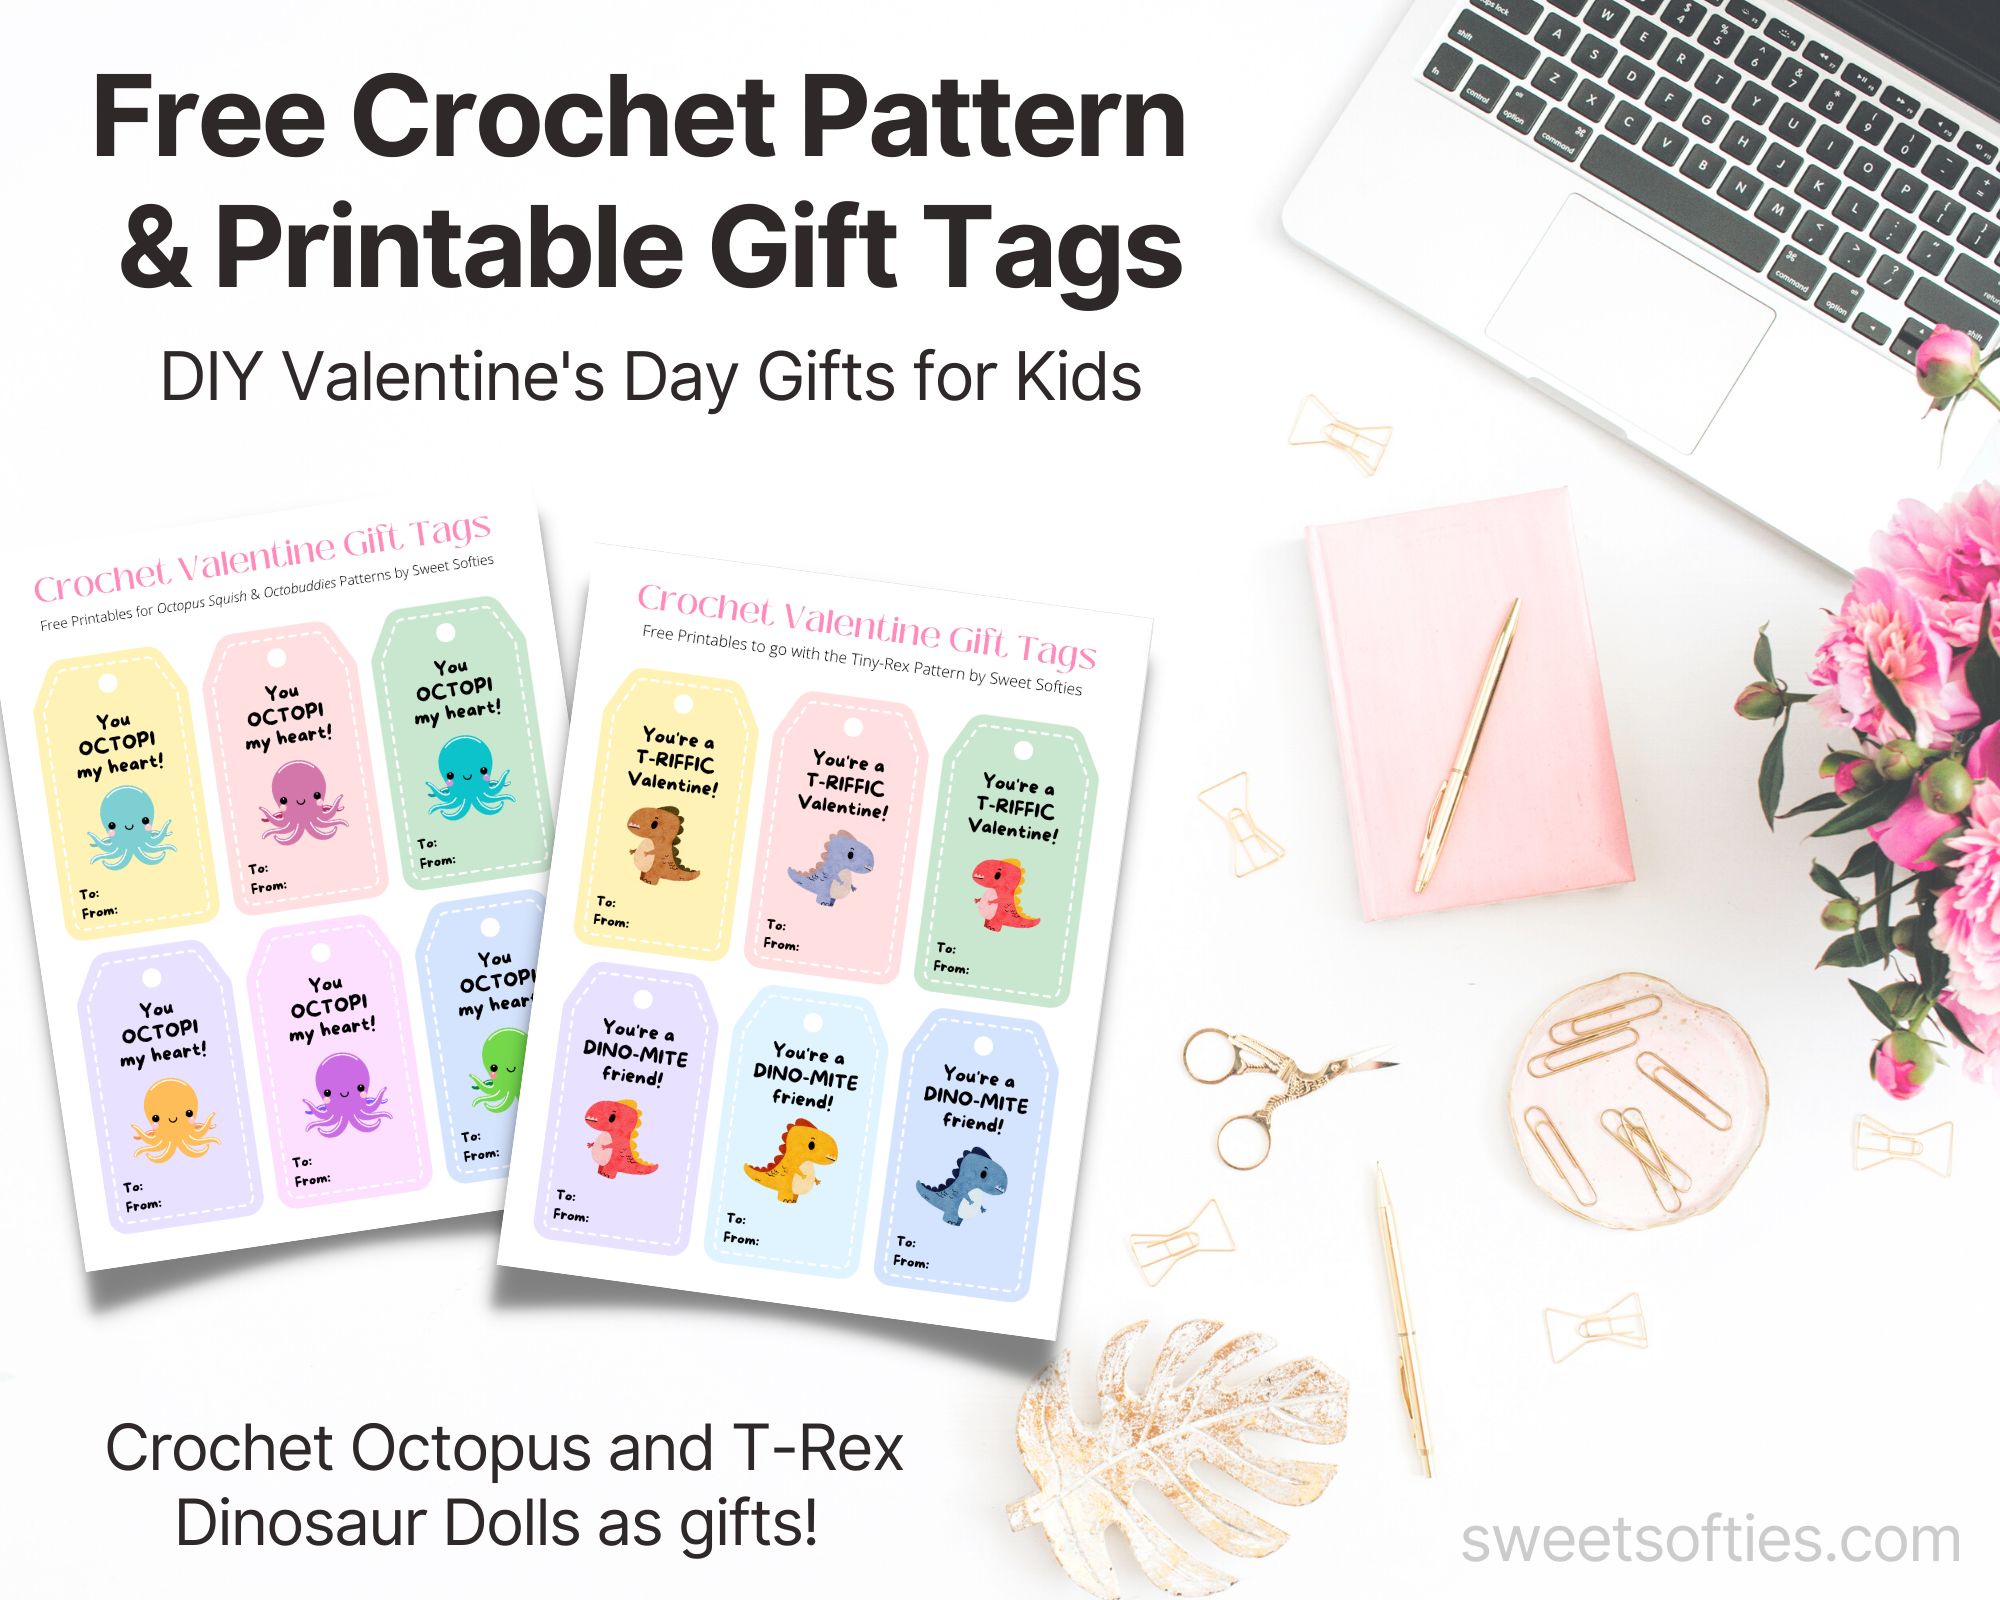 Crocheted With Love Printable Gift Tags  Printable gift labels, Crochet  labels, Gift tags printable